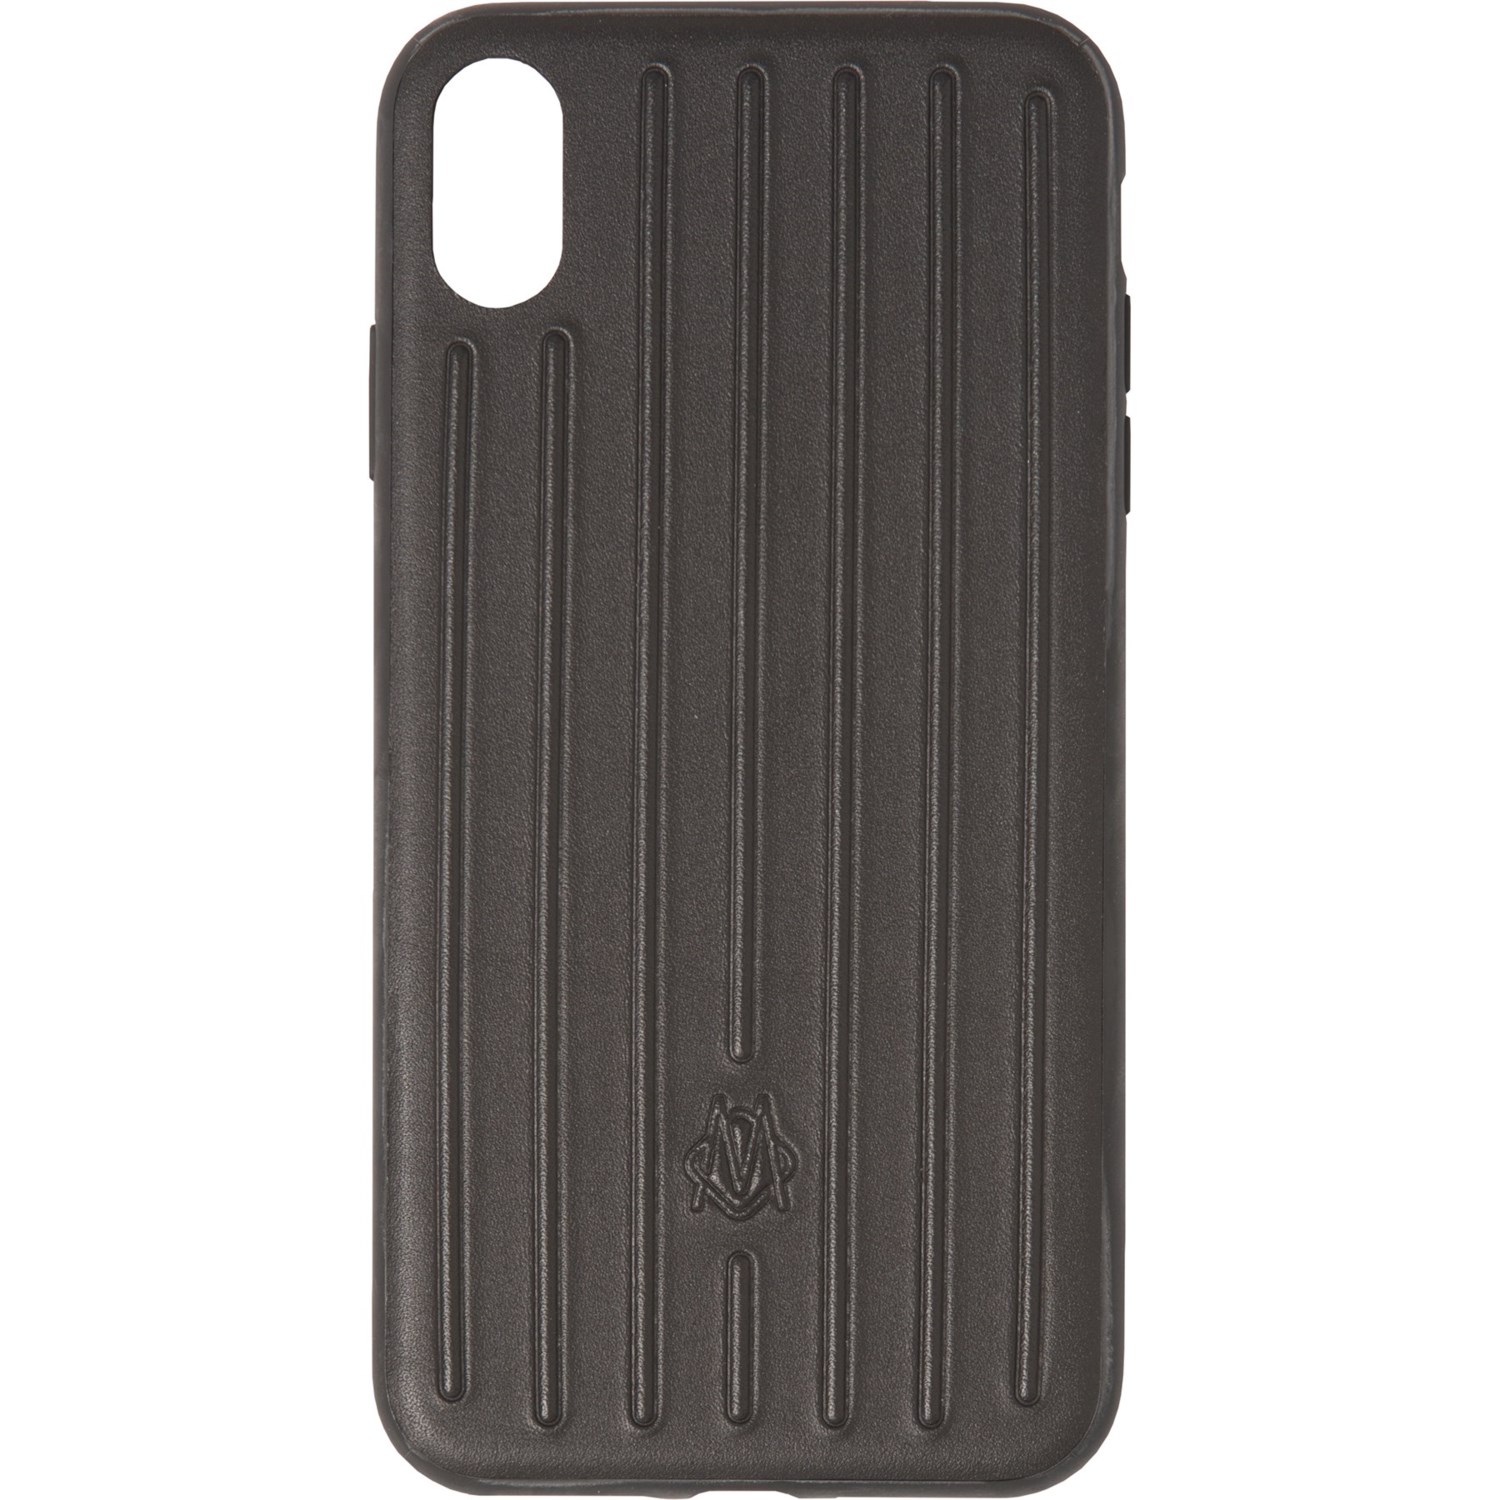 RIMOWA iPhone Xs MAX Cell Phone Case - Leather, Black